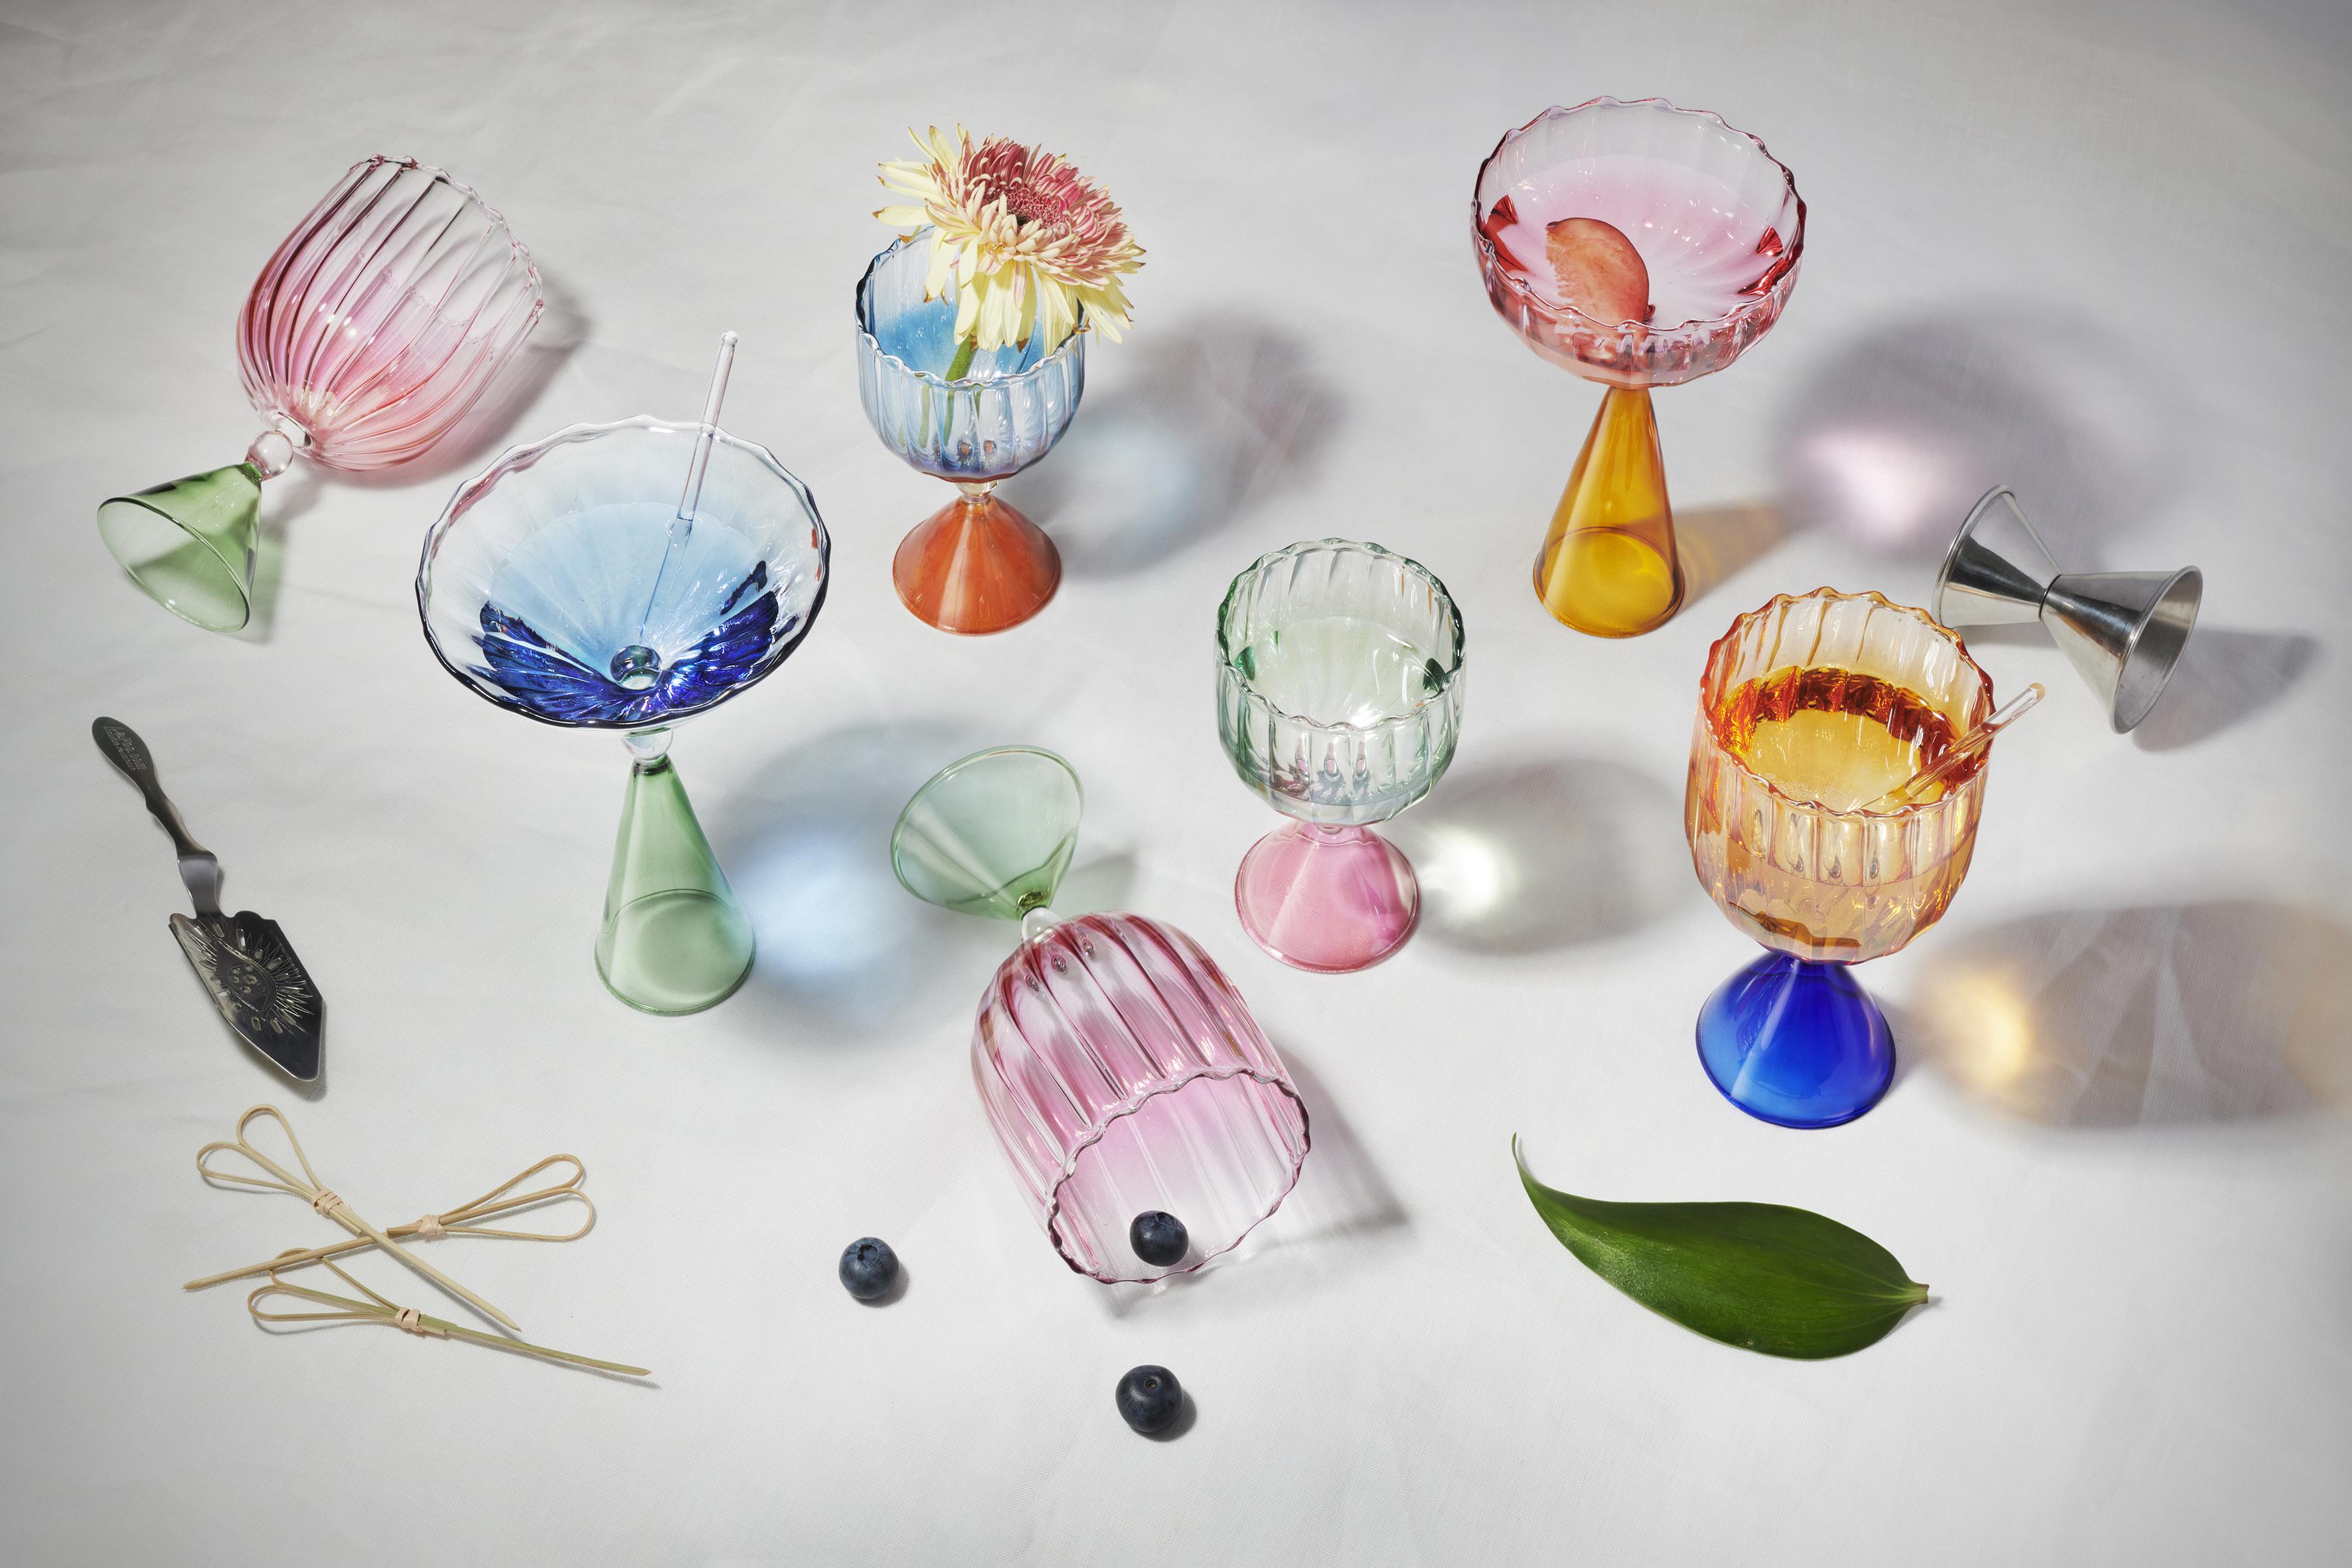 Calypso collection investigates new ways of conviviality: fed by imaginary worlds, this tableware pieces make possible to dream of exotic and uncontaminated landscapes. Calypso synthesizes with its shapes the dialogue between function and